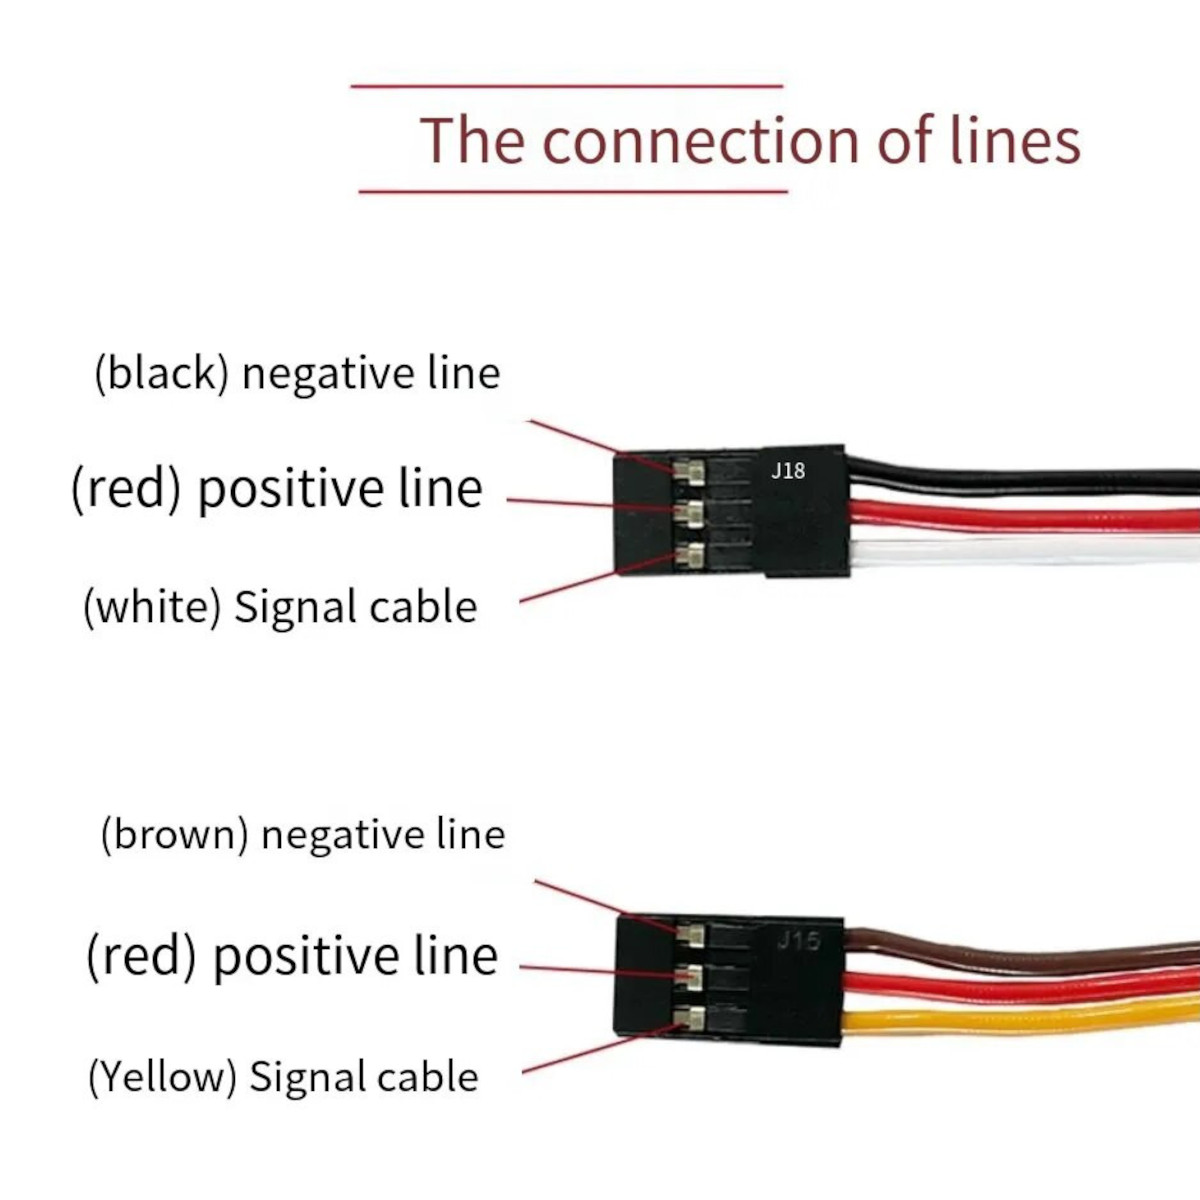 Connections of Lines